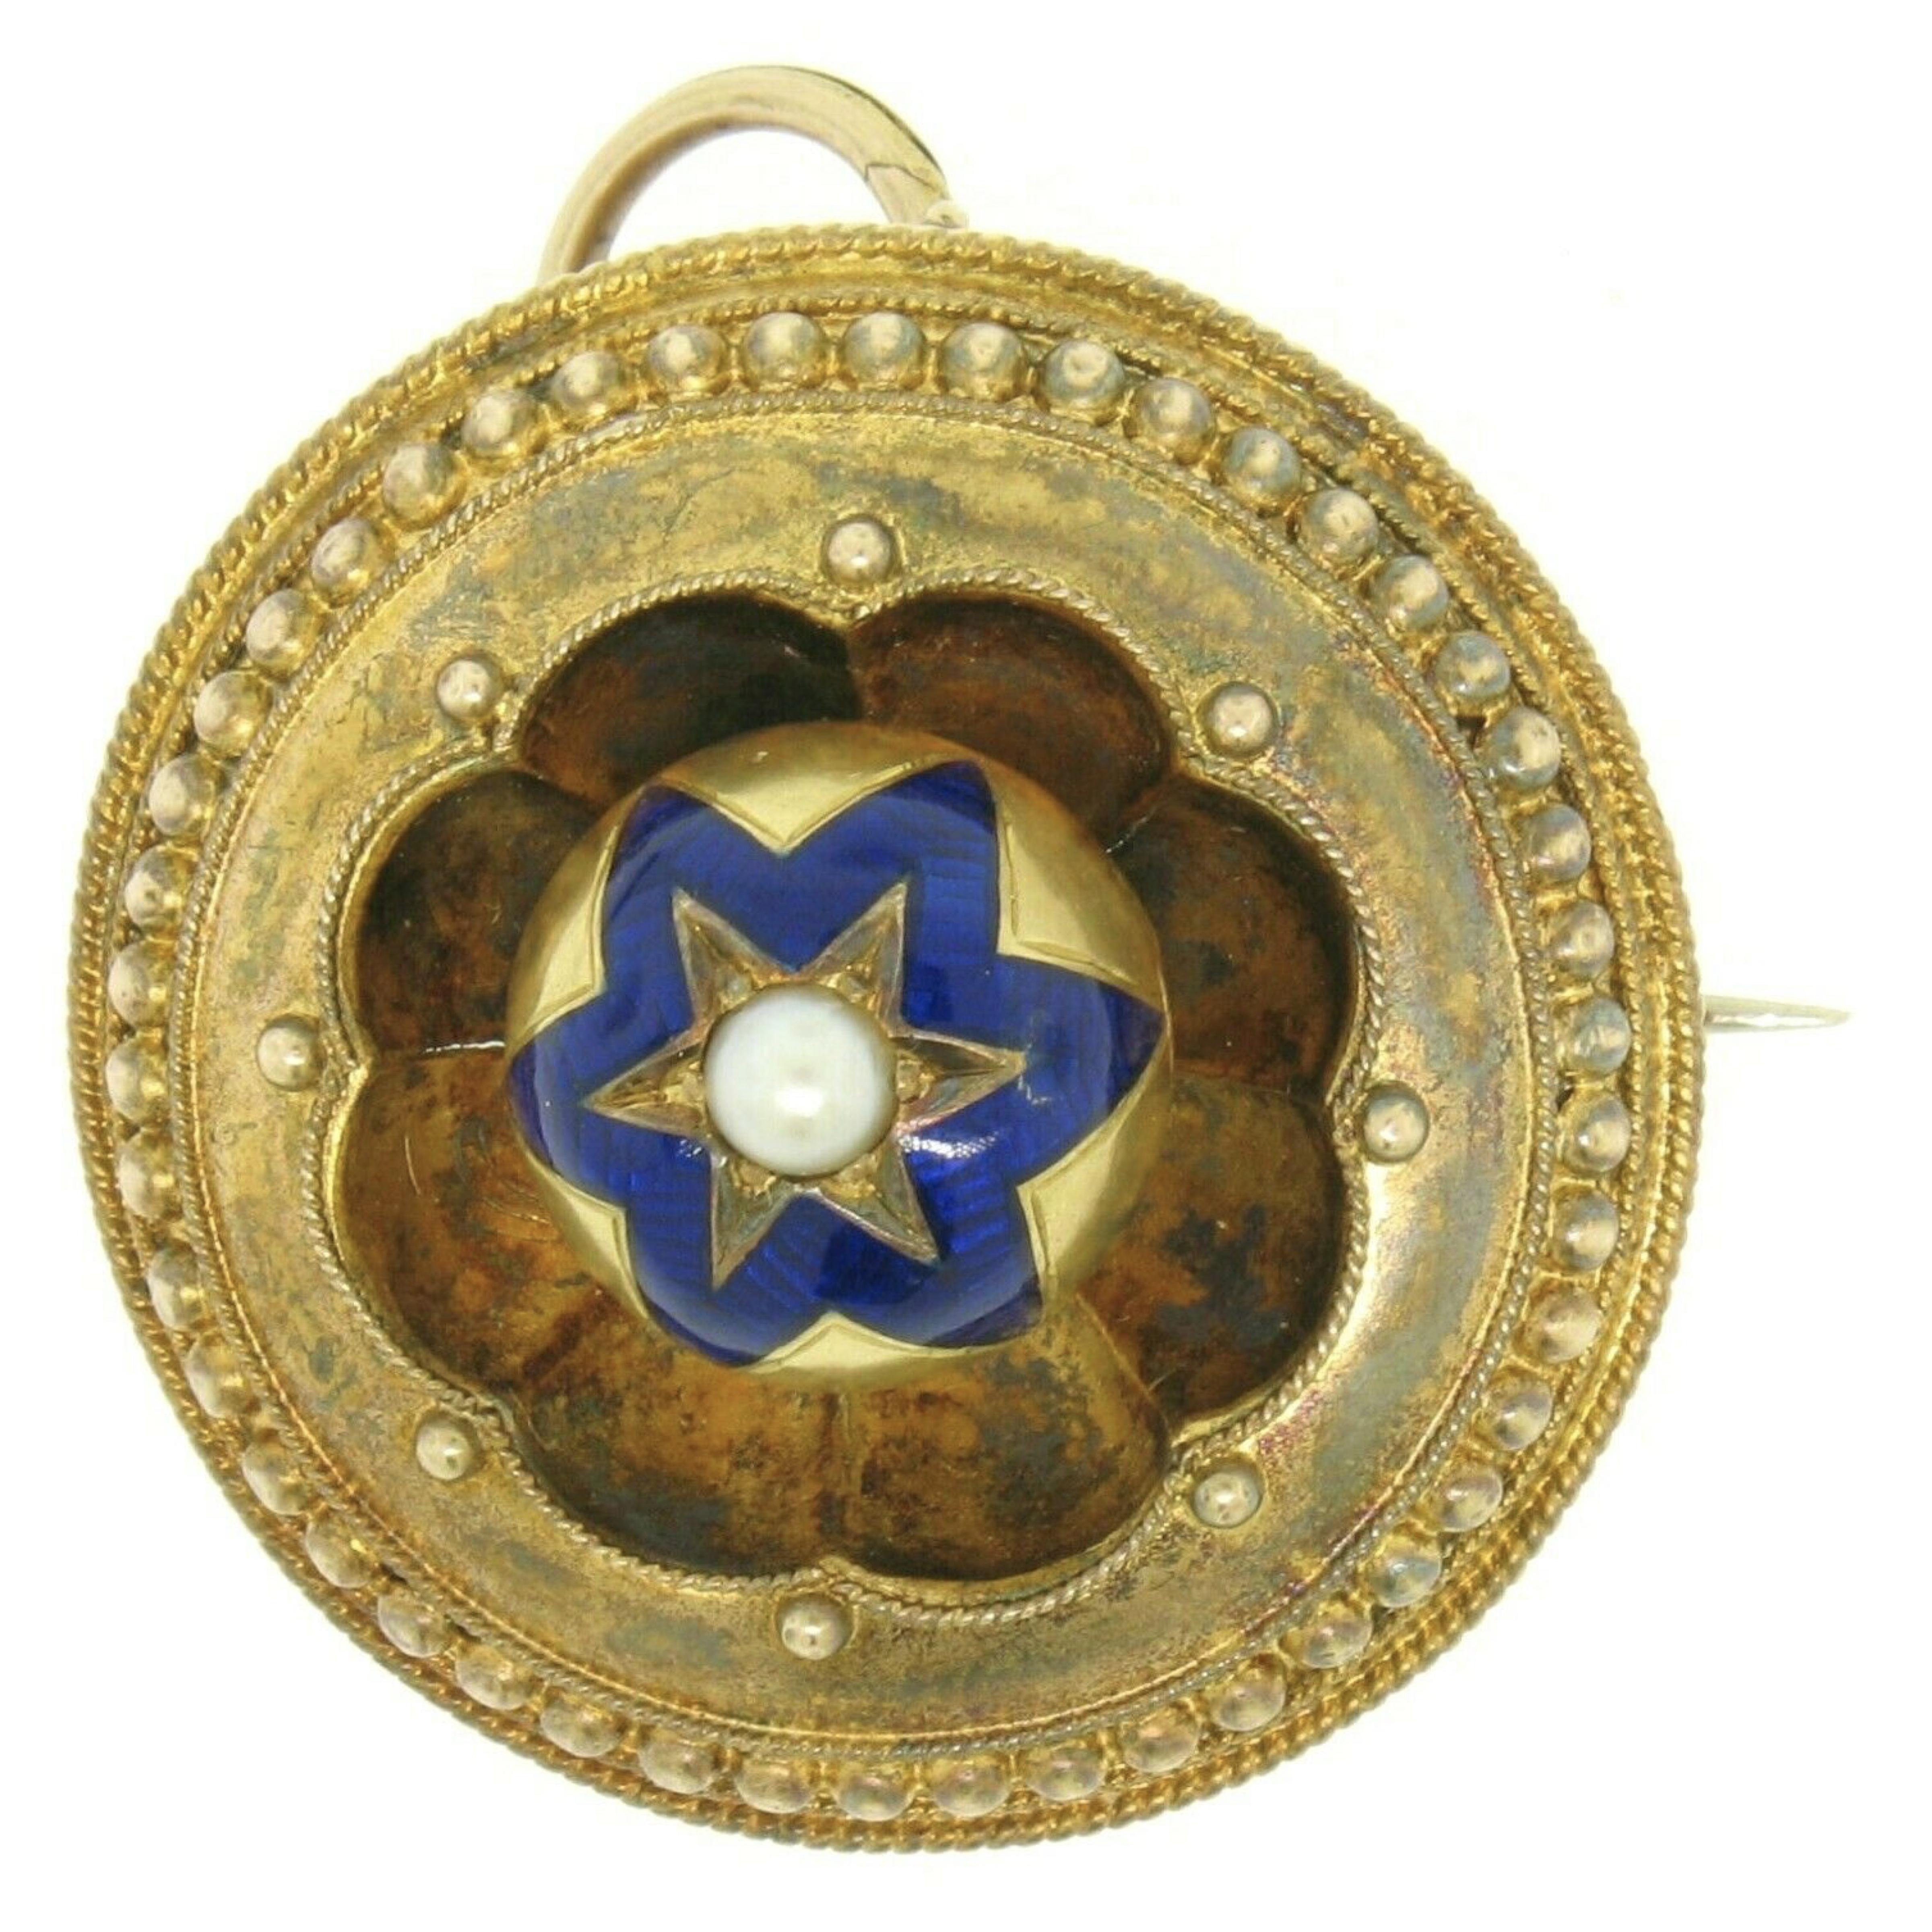 Here we have an amazing antique hair/picture locket from Victorian England. The piece is solid 15k yellow gold and has its original patina in tact. The piece has an Etruscan style design with a six pointed, champlevé, royal blue enamel work star.